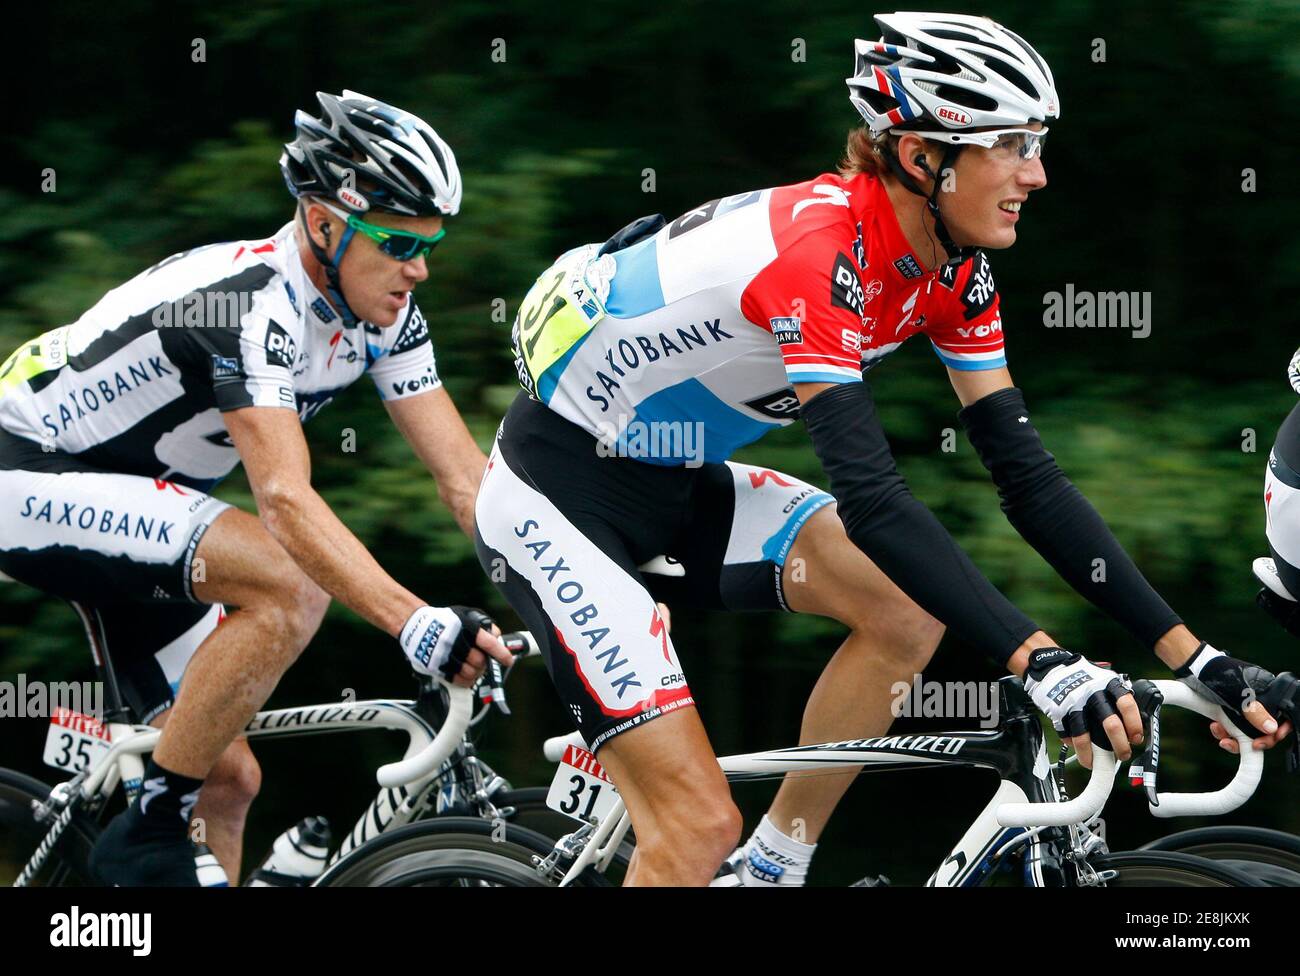 Team Saxo Bank rider Andy Schleck of Luxembourg (R) cycles with Team Saxo  Bank Stuart O'Grady of Australia during the 14th stage of the 96th Tour de  France cycling race between Colmar